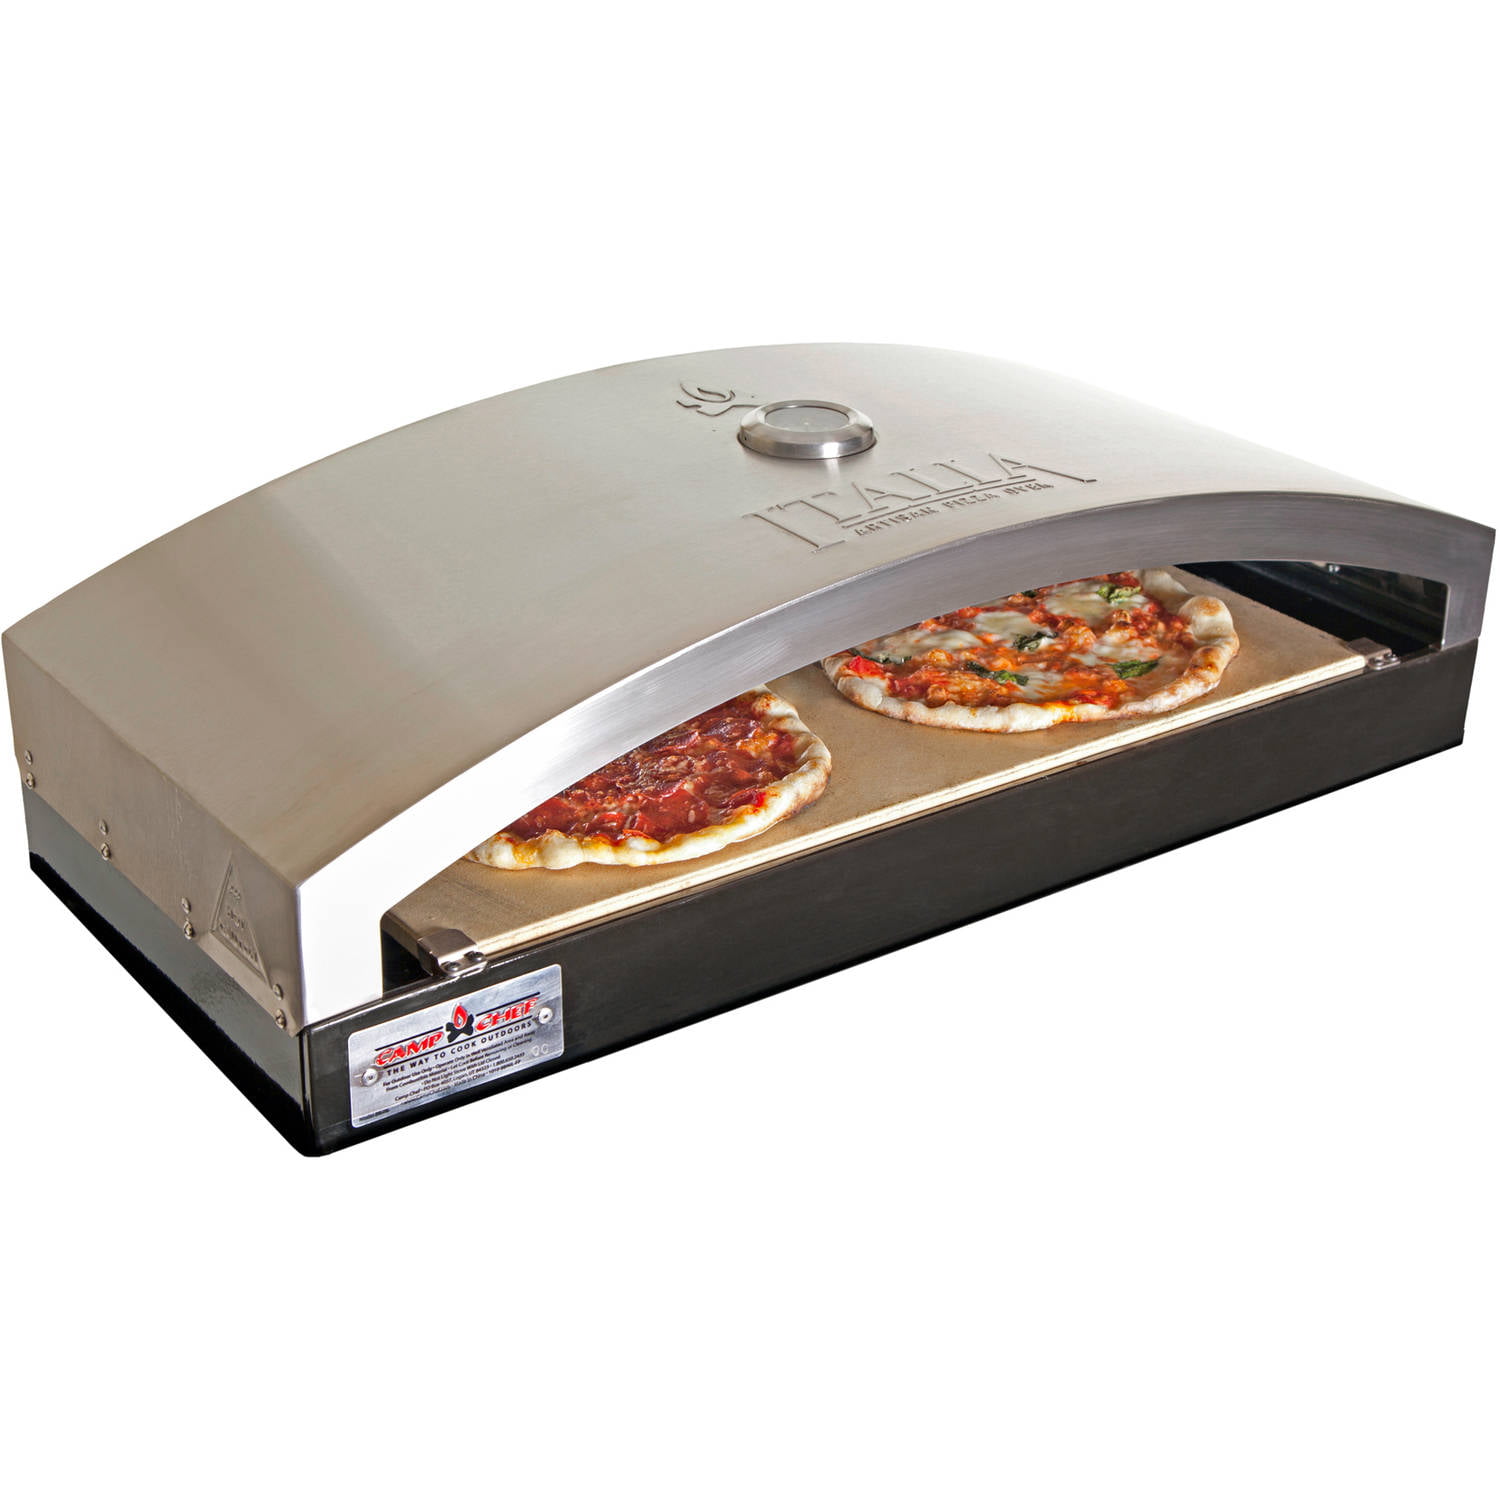 Camp Chef Artisan Outdoor 14 Domed, Outdoor Brick Oven Pizza Maker